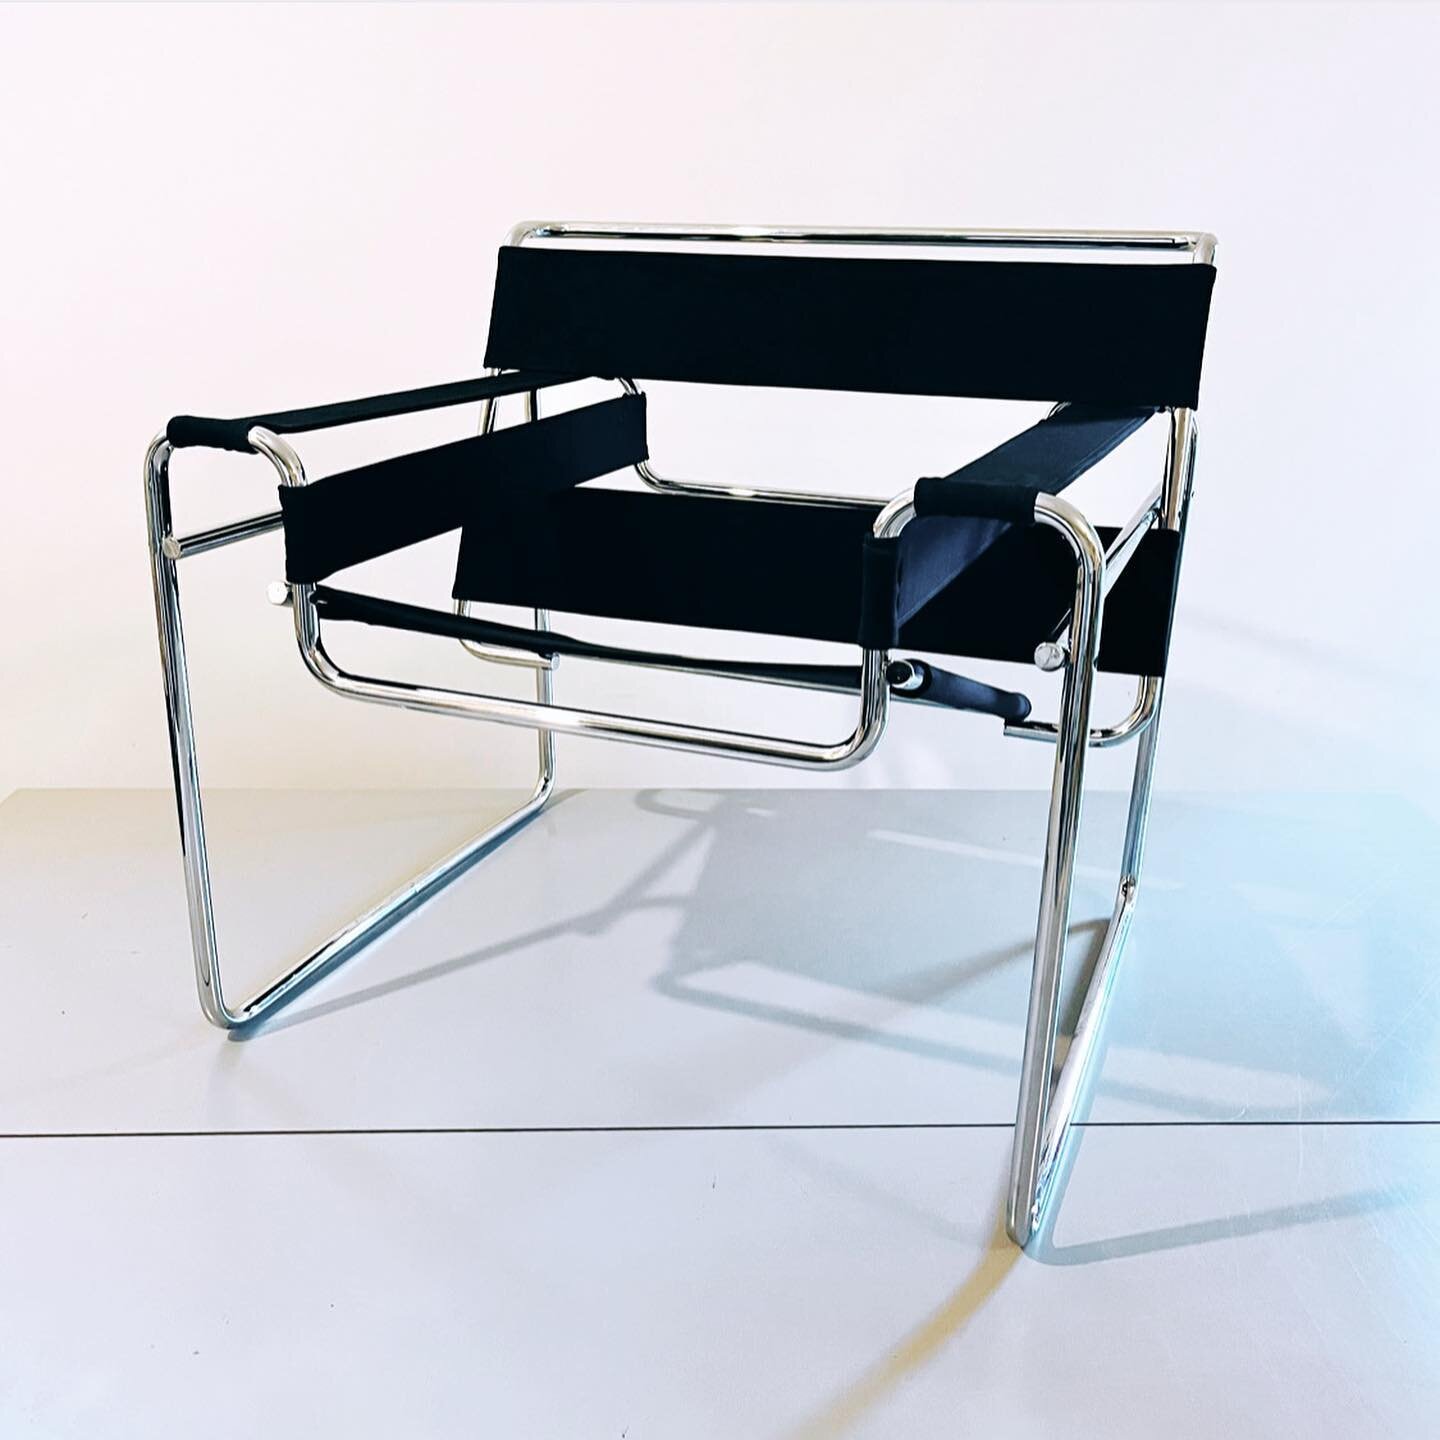 Modern. Minimal. Iconic. A revolutionary design. These genuine Wassily Chairs were designed by Marcel Breuer in 1925 and came straight out of the Bauhaus, an influential school of modern art, architecture, and design in Germany. Inspired by the light